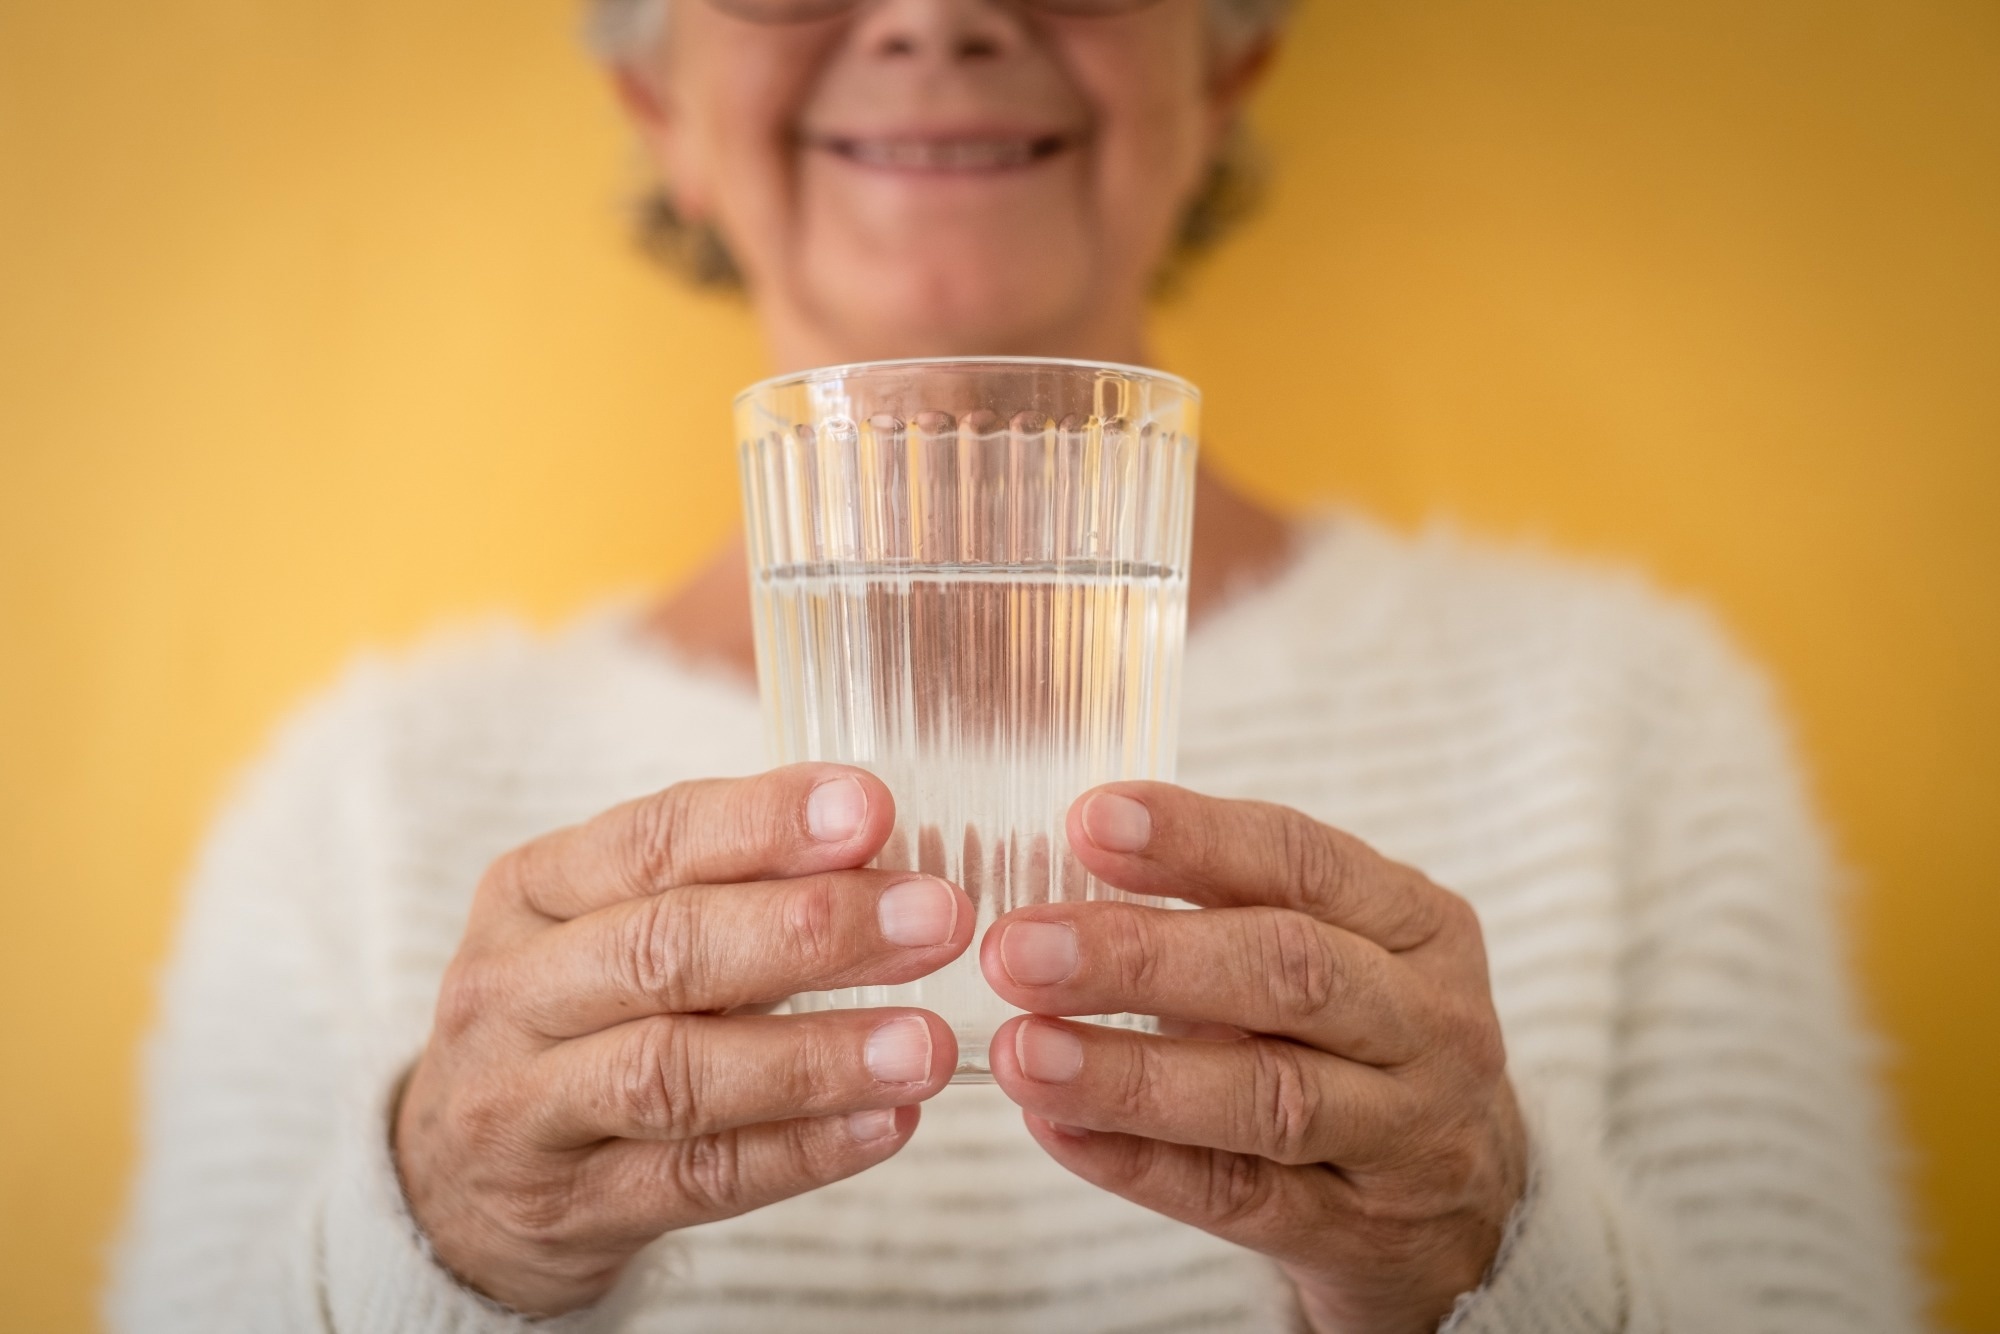 Study: Middle-age high normal serum sodium as a risk factor for accelerated biological aging, chronic diseases, and premature mortality. Image Credit: Lucigerma / Shutterstock